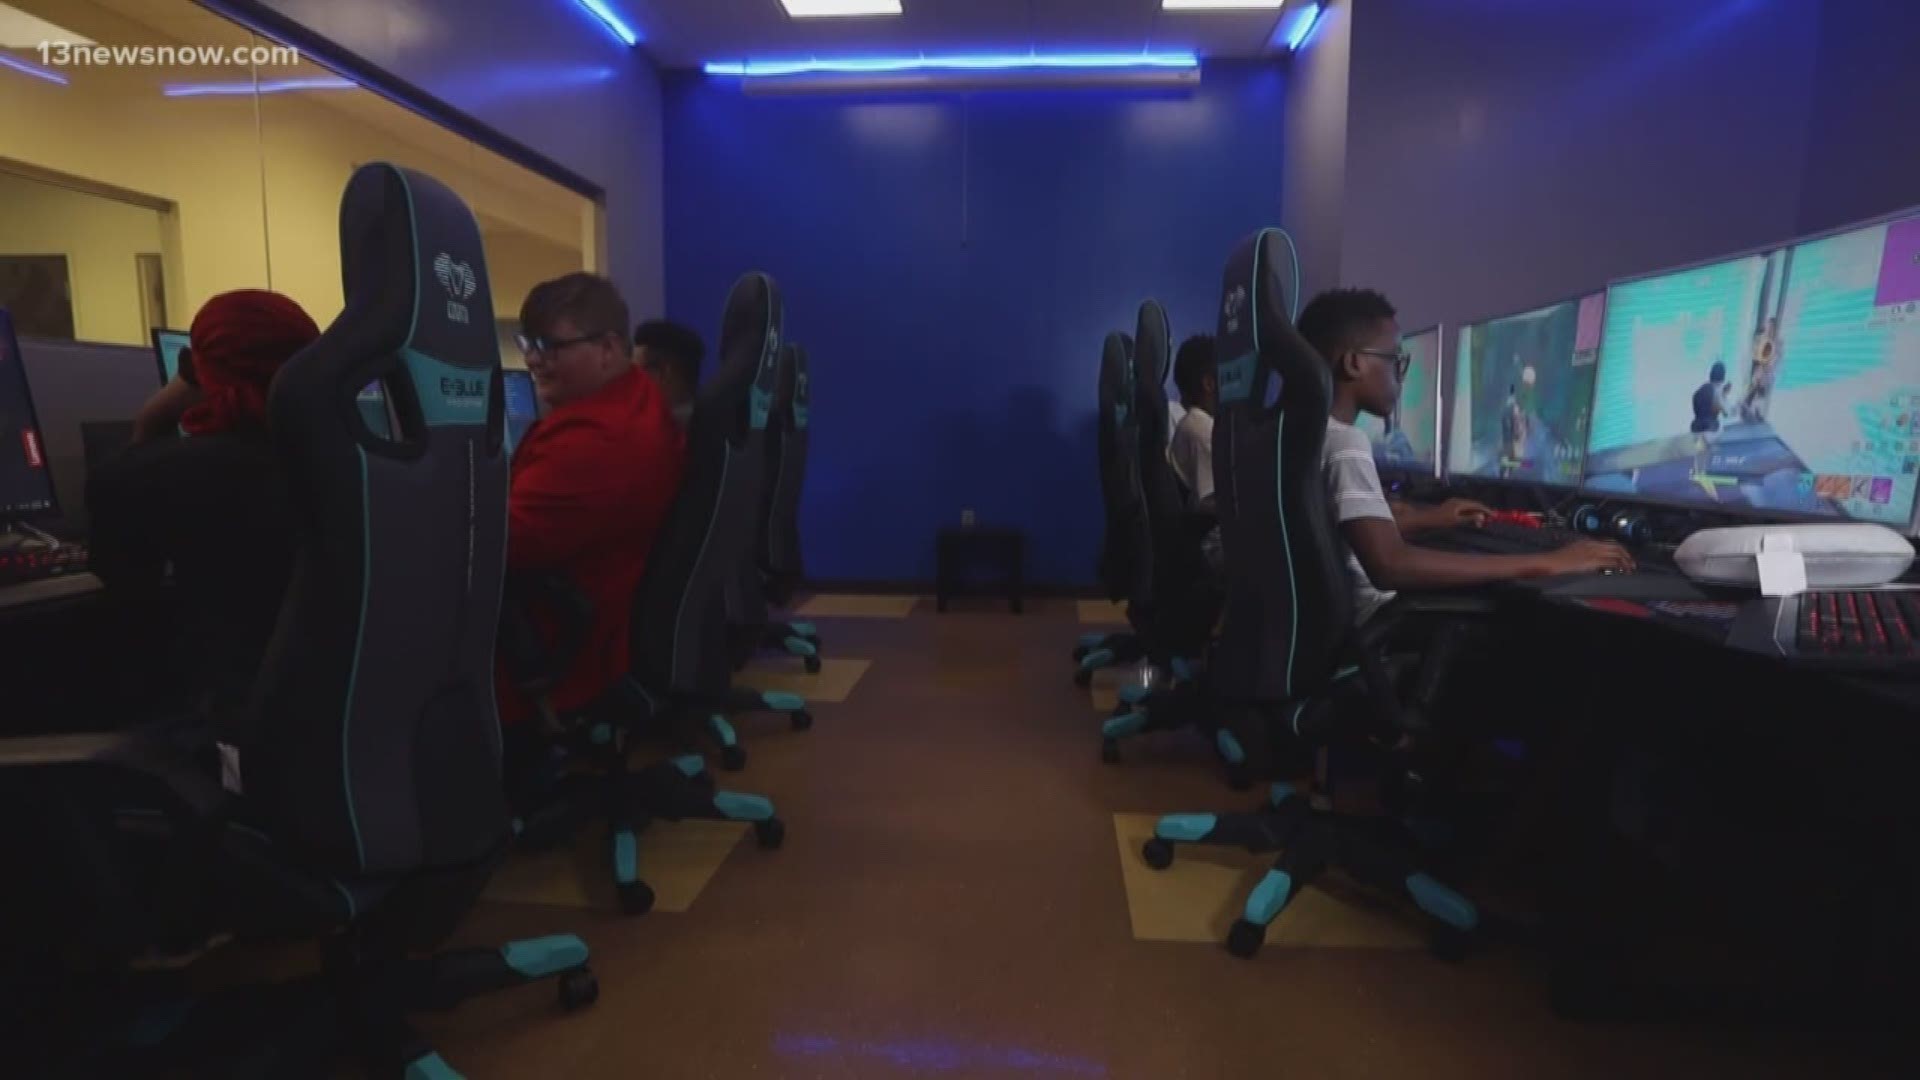 Bryant & Stratton College in Hampton is hosting an esports camp. The week-long camp is meant to train gamers, but it also teaches them life skills.